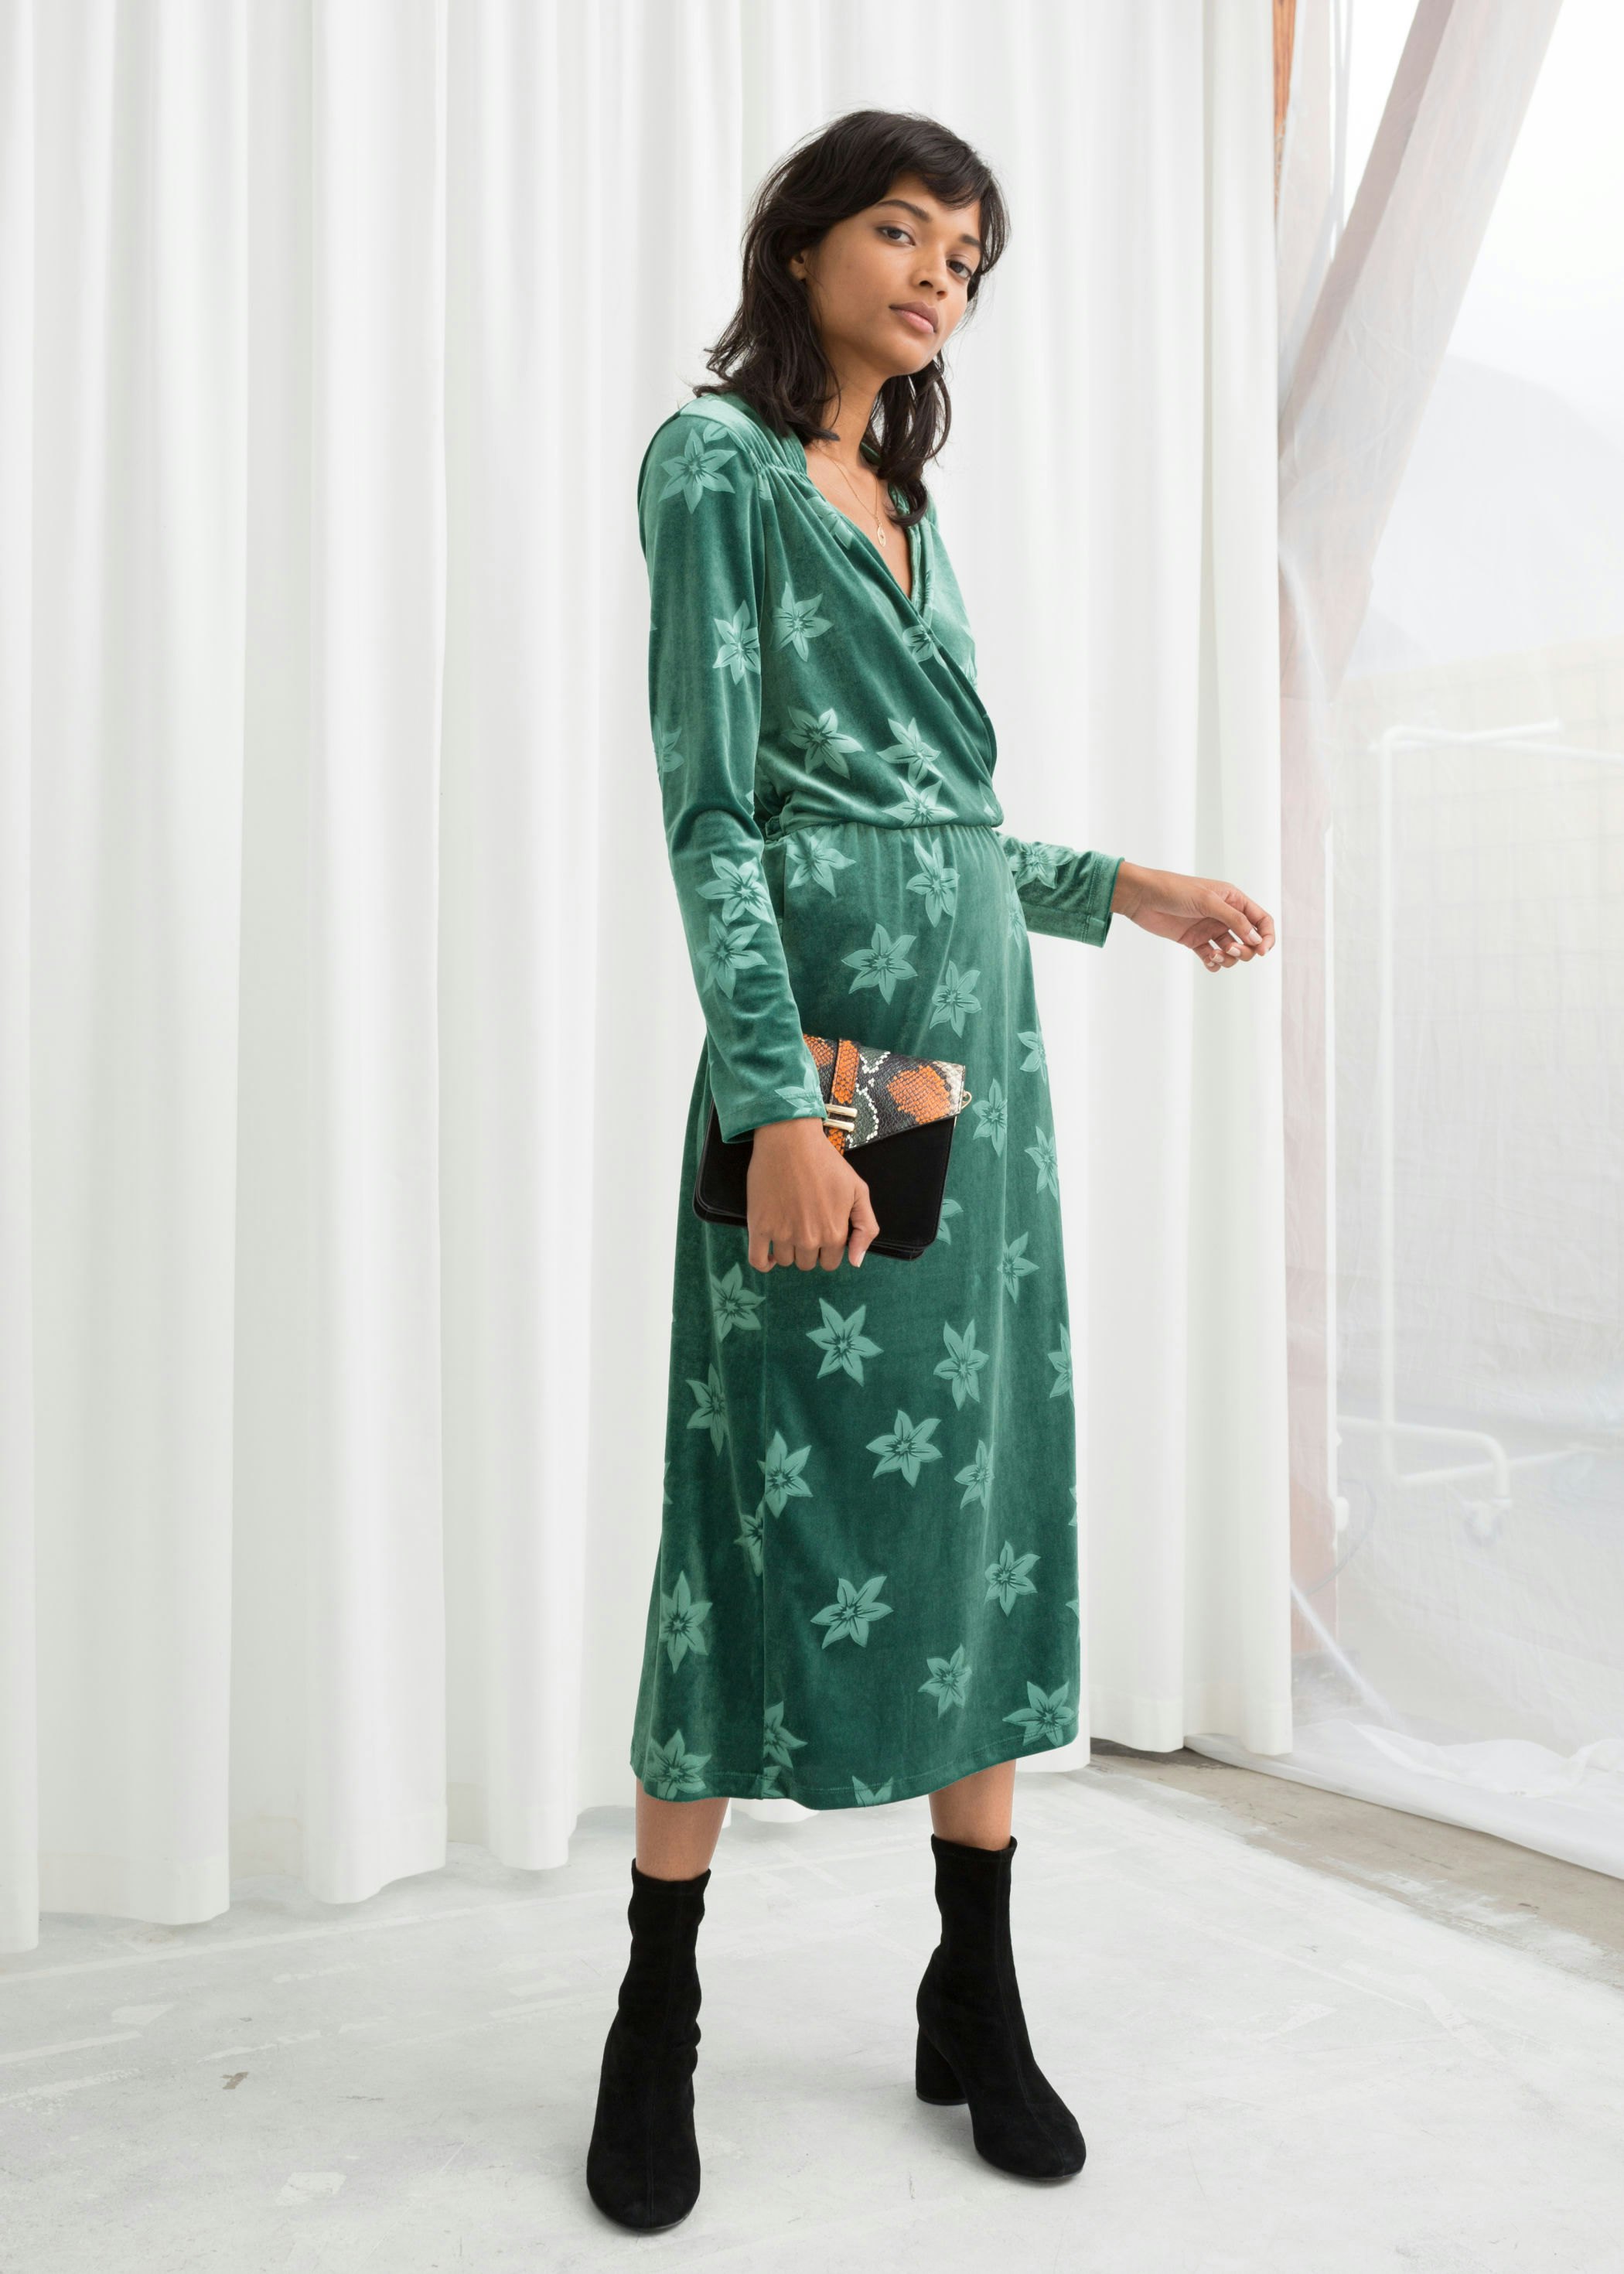 & other stories green wrap dress